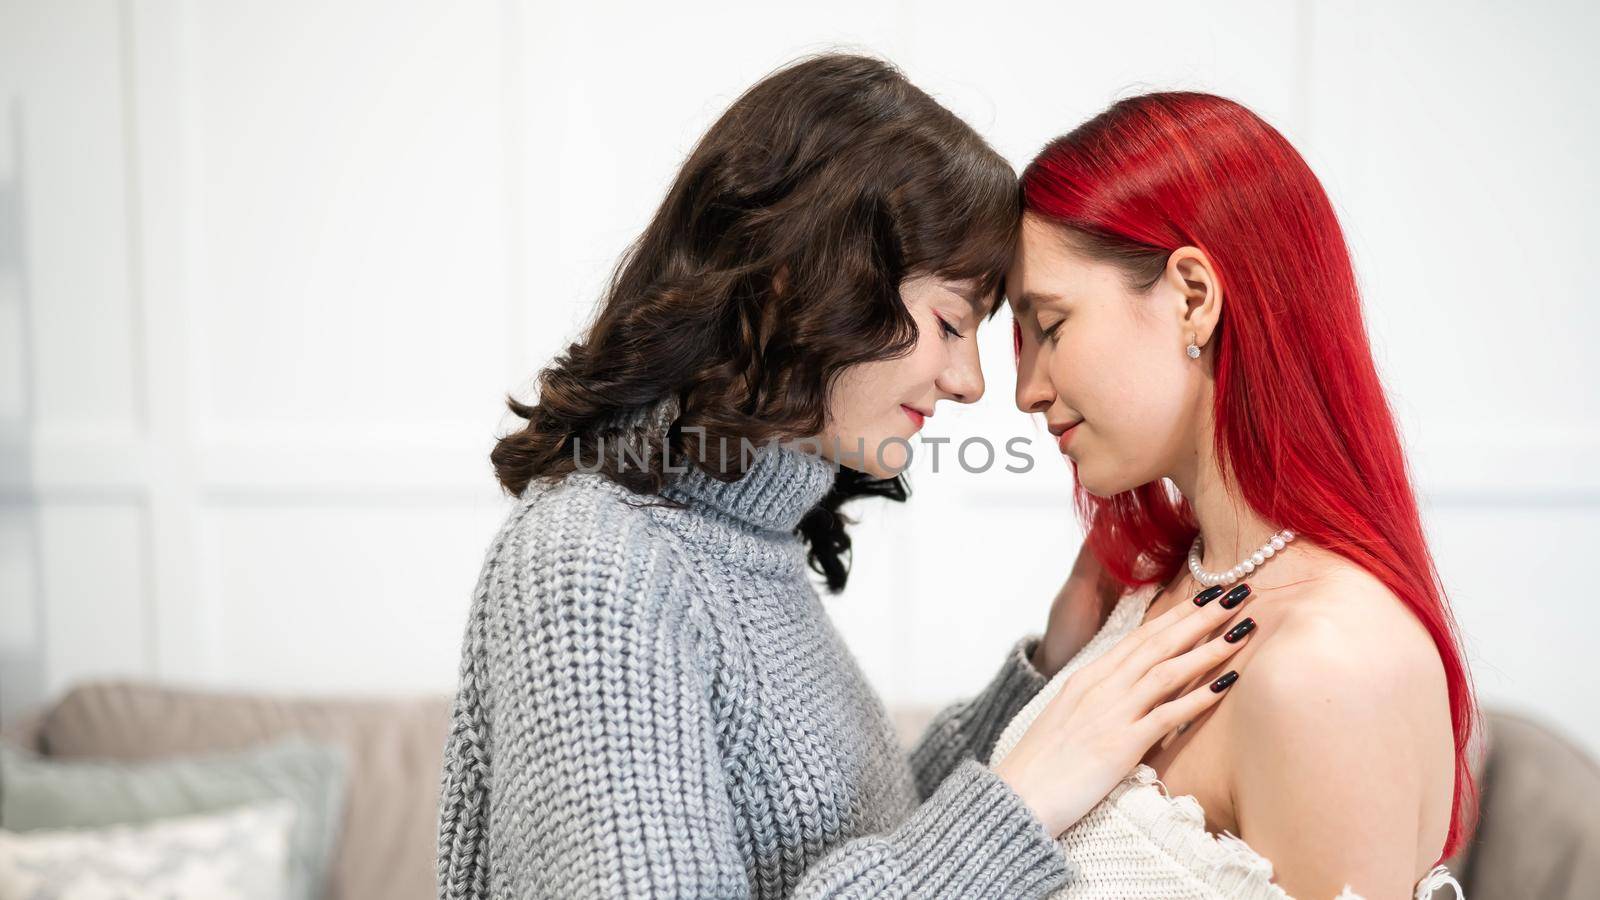 Young Caucasian women hugging tenderly. Same-sex relationships